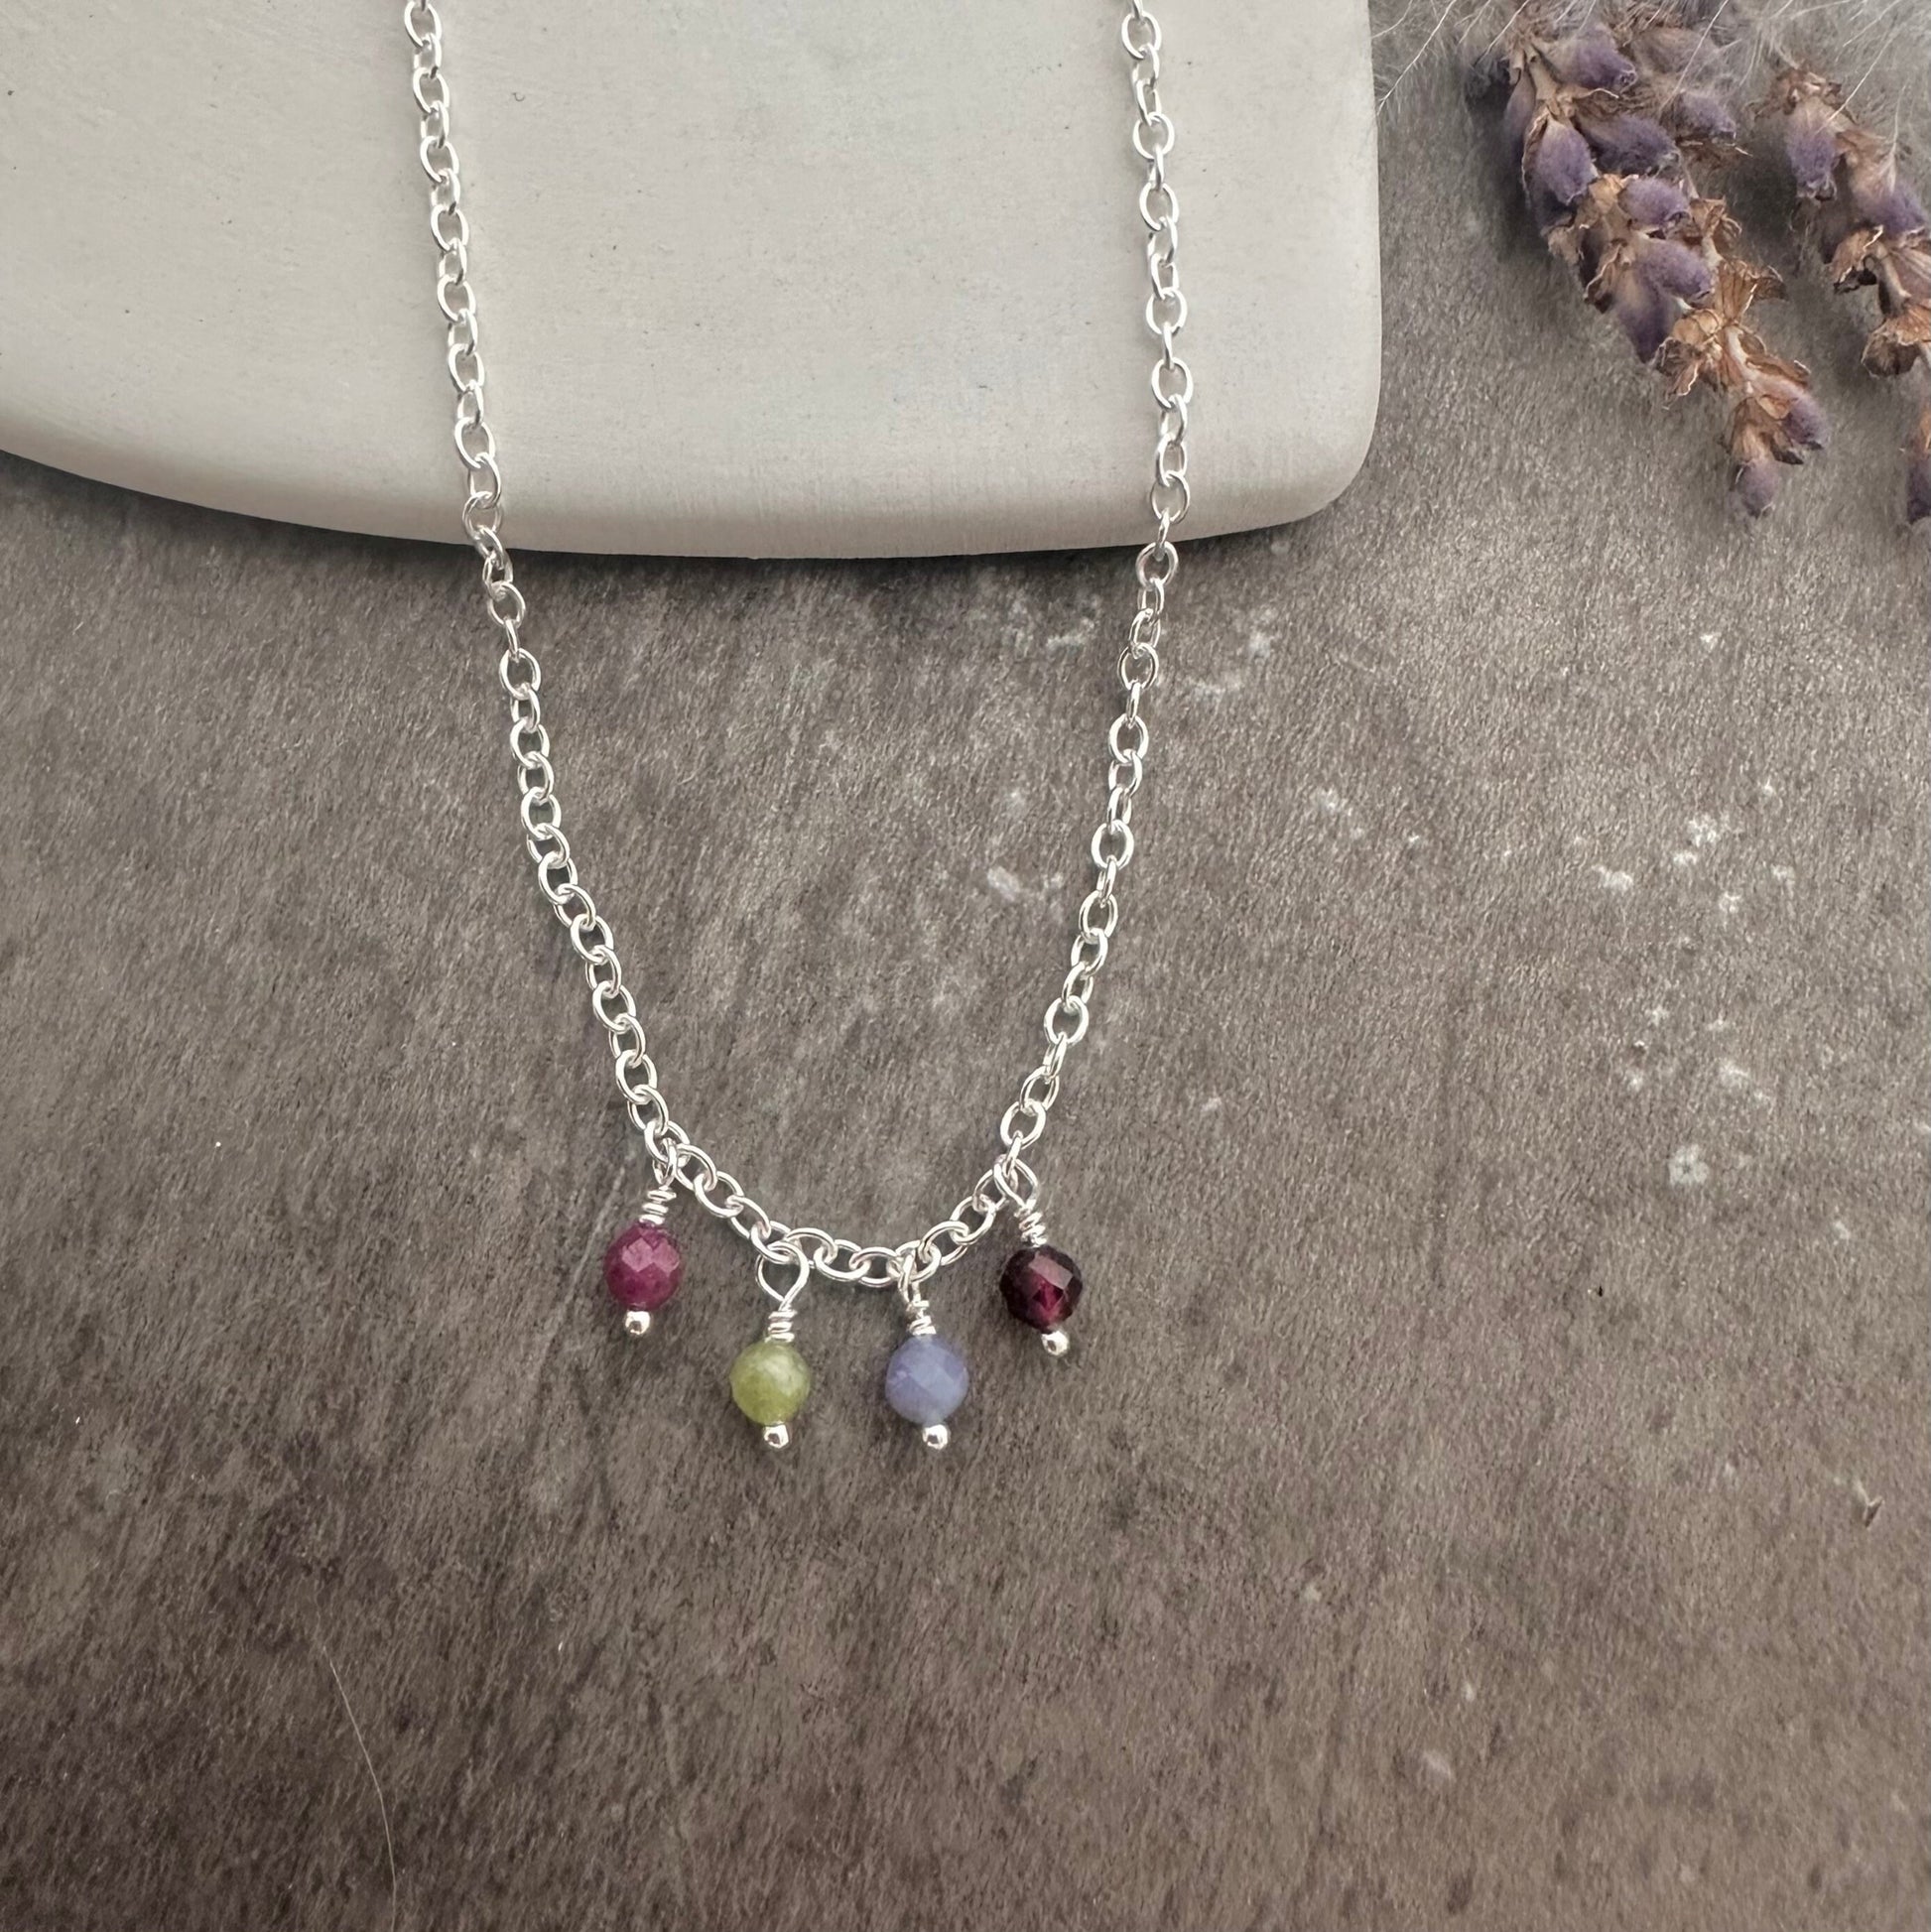 Dainty Birthstone Family Necklace for Mothers Day in Sterling Silver